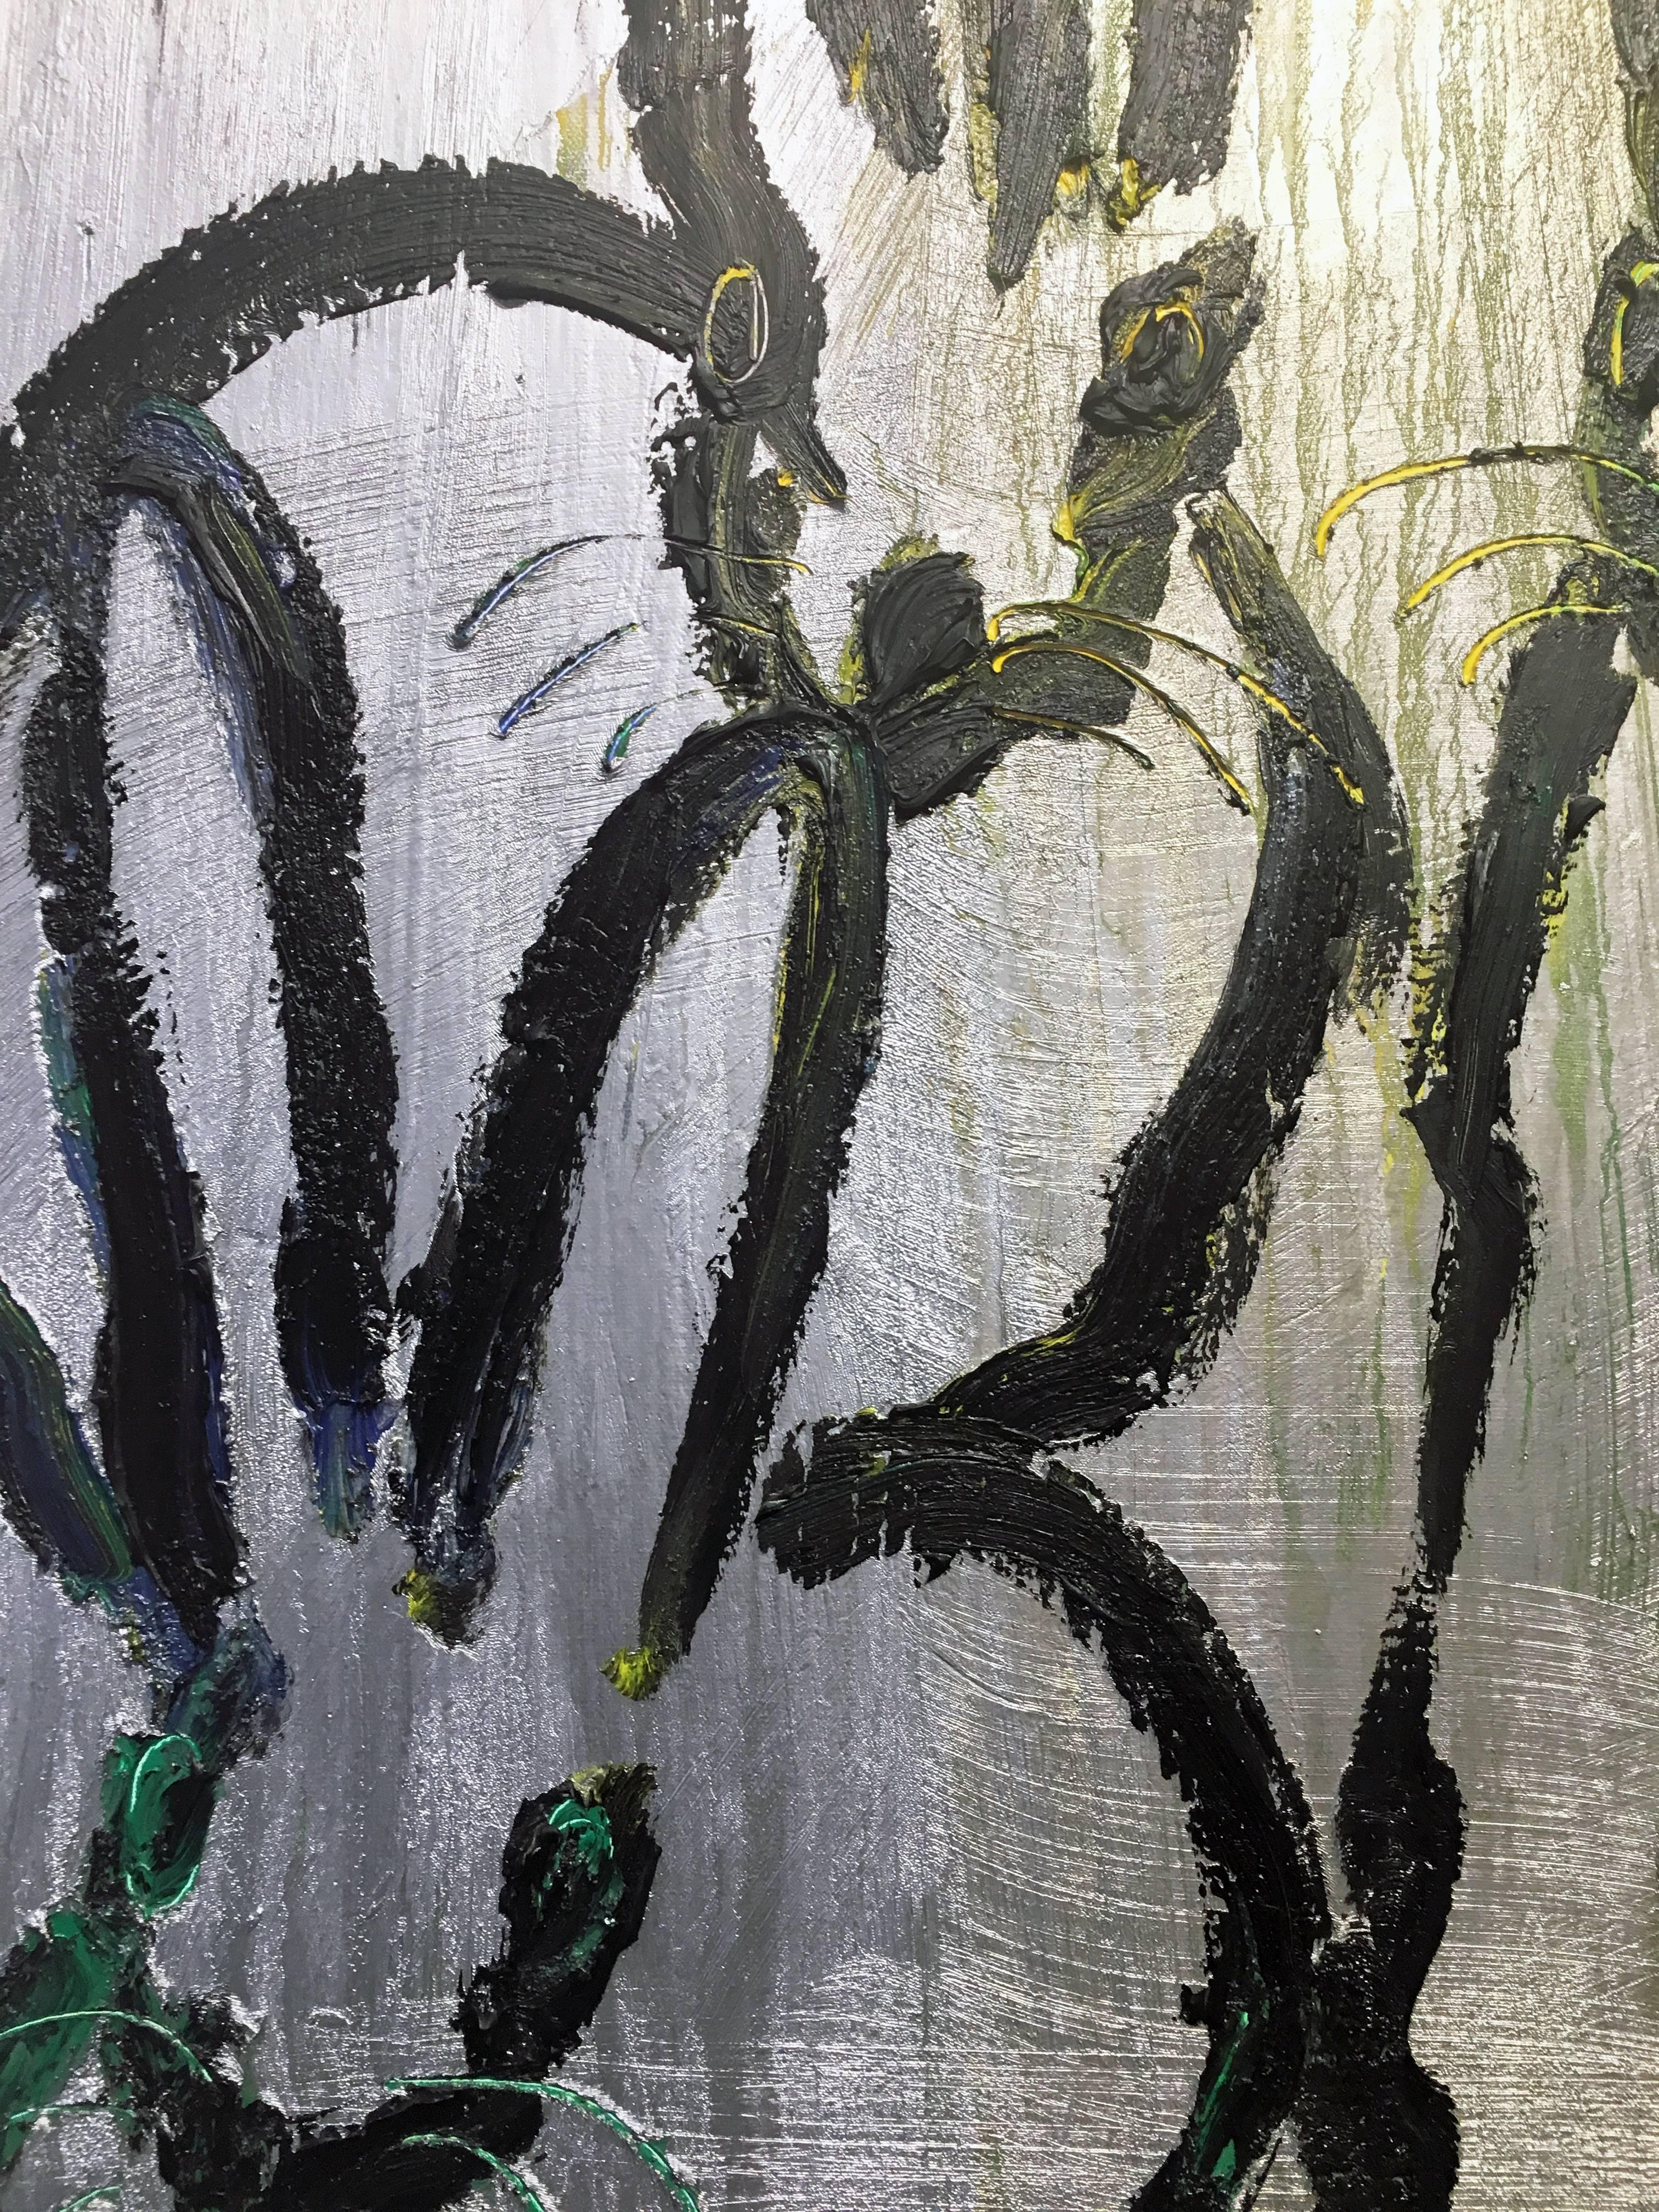 '4 Play,' 2016 by renowned New York City artist, Hunt Slonem. Oil on canvas, 30 x 24 inches. This painting features a 'fluffle' of three bunnies in black outline on a silver, gold, and green painted canvas.

Considered one of the great colorists of